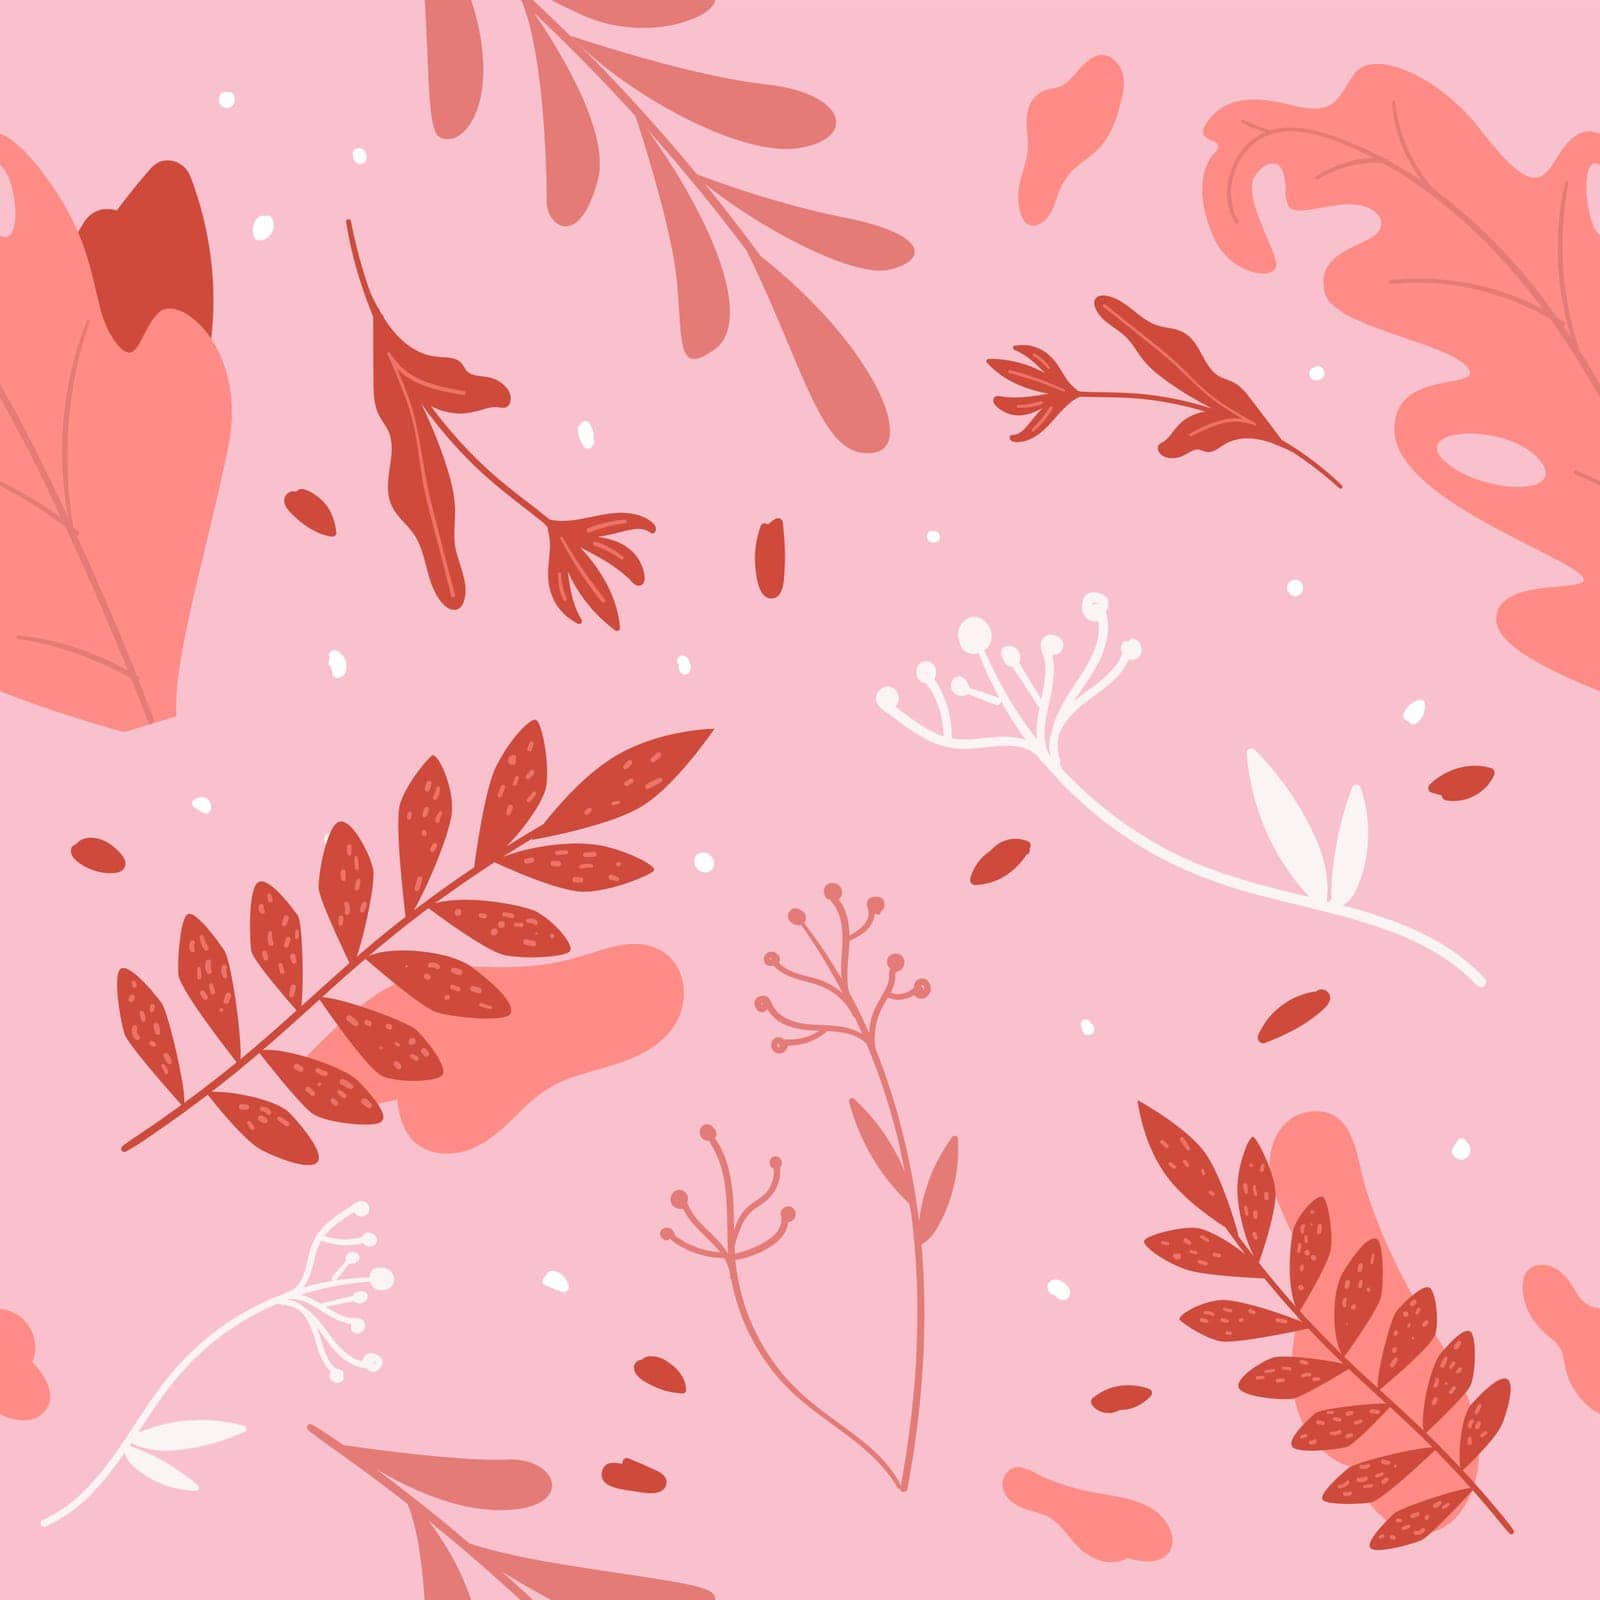 Foliage and leaves, summer or spring adornment and decoration. Twigs and branches, leaf and flowering plants botany variety. Seamless pattern, background or wallpaper print. Vector in flat style